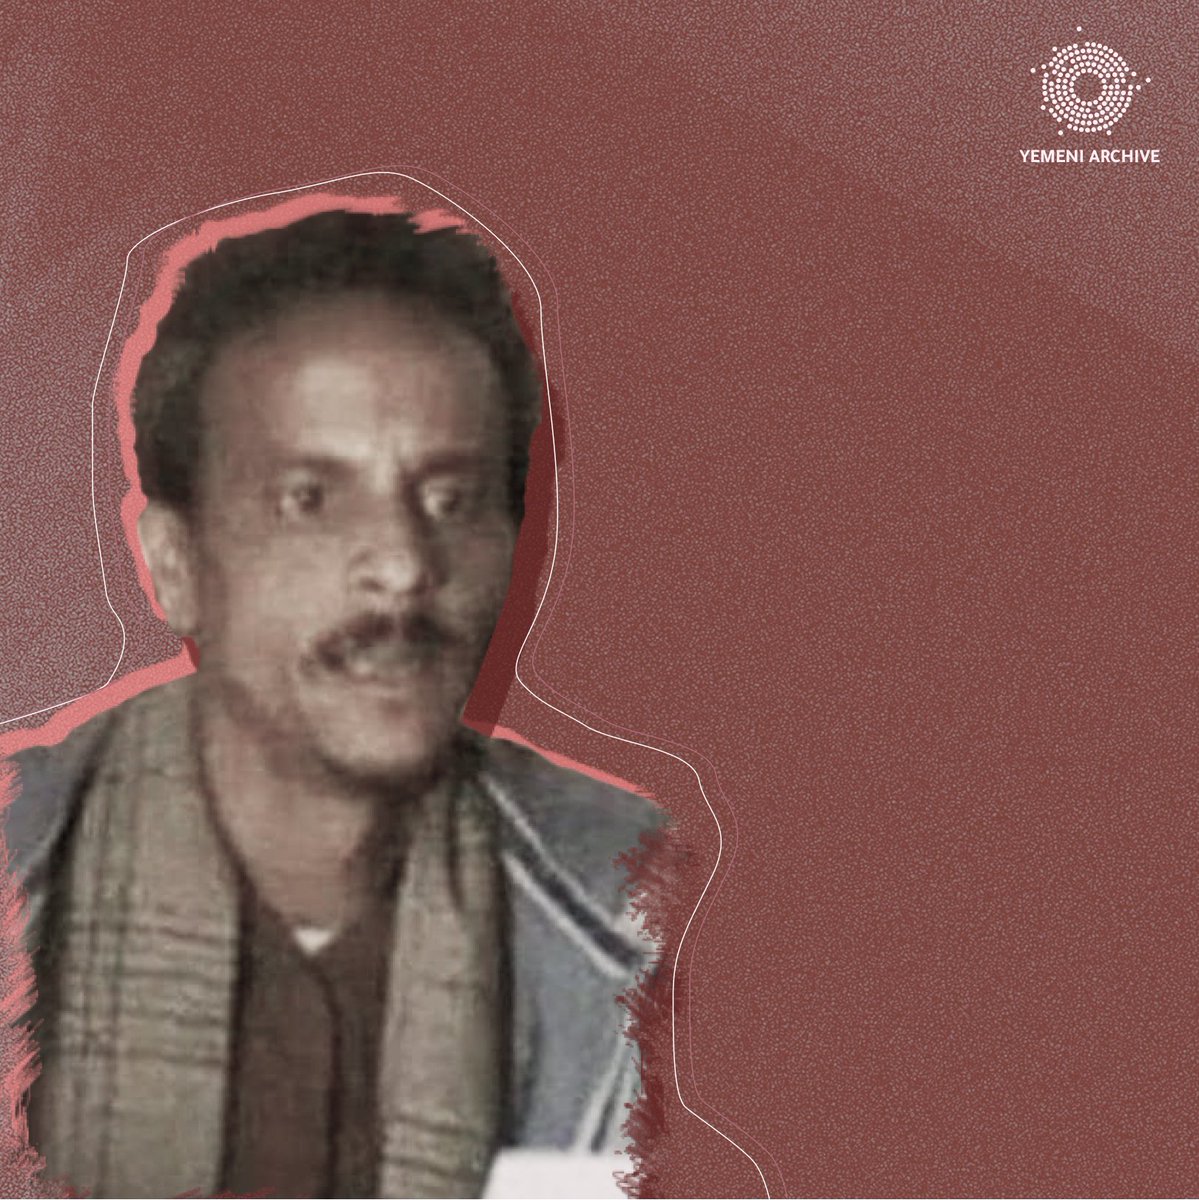 On this day, we recall the journalist Anwar al-Rakan, who died on June 2, 2019, two days after being released by the Ansar Allah Houthis according to a statement from the Yemeni Journalists Syndicate. Al-Rakan was detained for almost a year earlier, and his health deteriorated